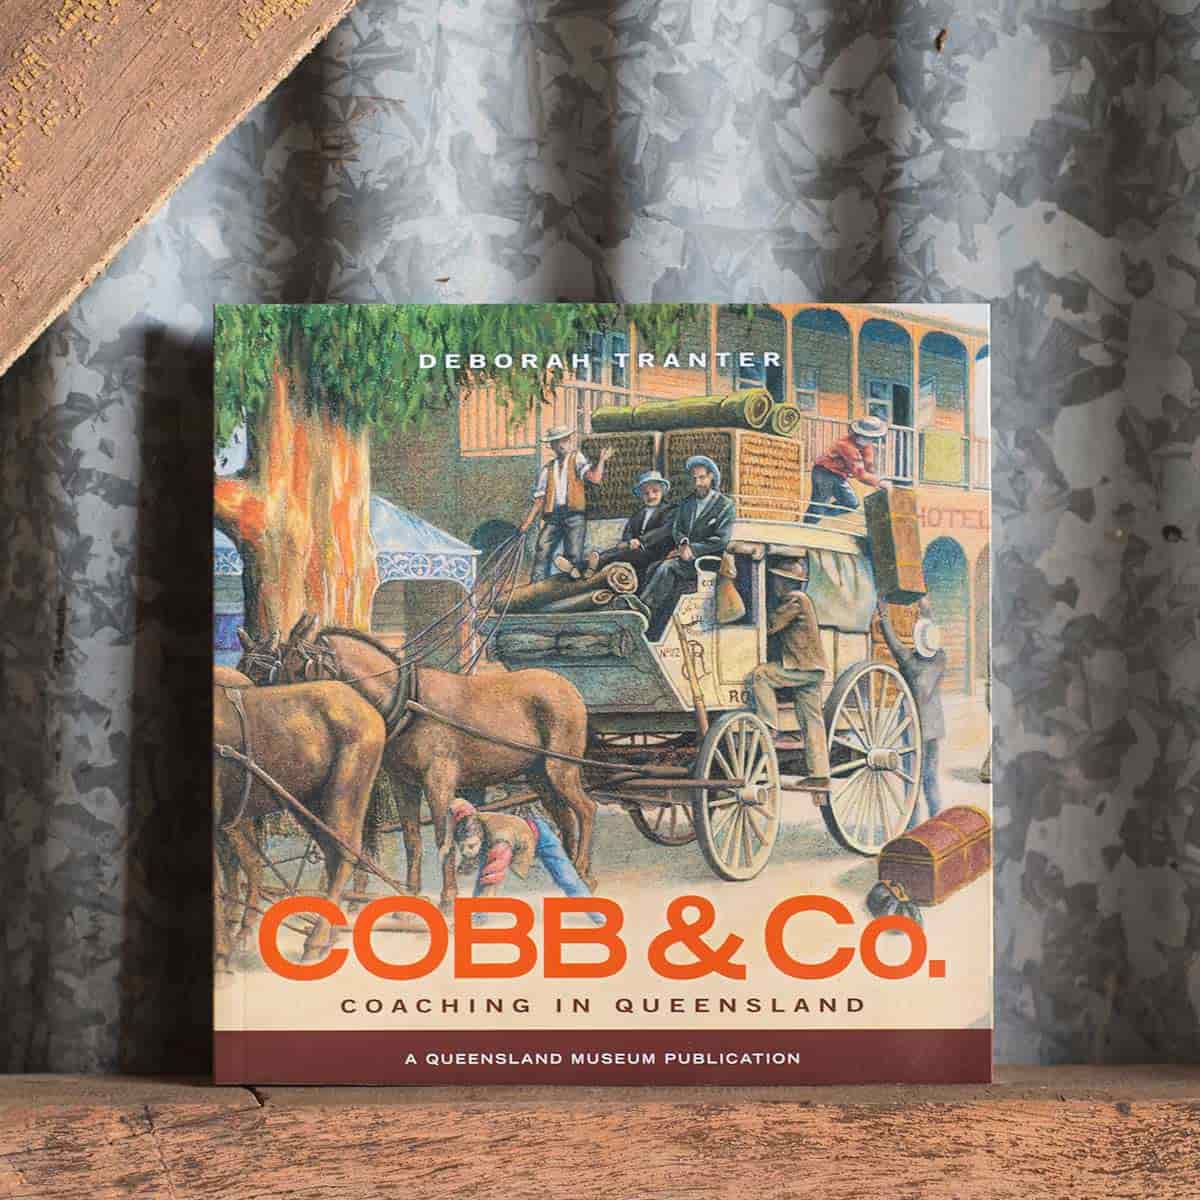 Cobb and Co. Coaching in Queensland book. A Queensland Museum Publication. by Deborah Tranter